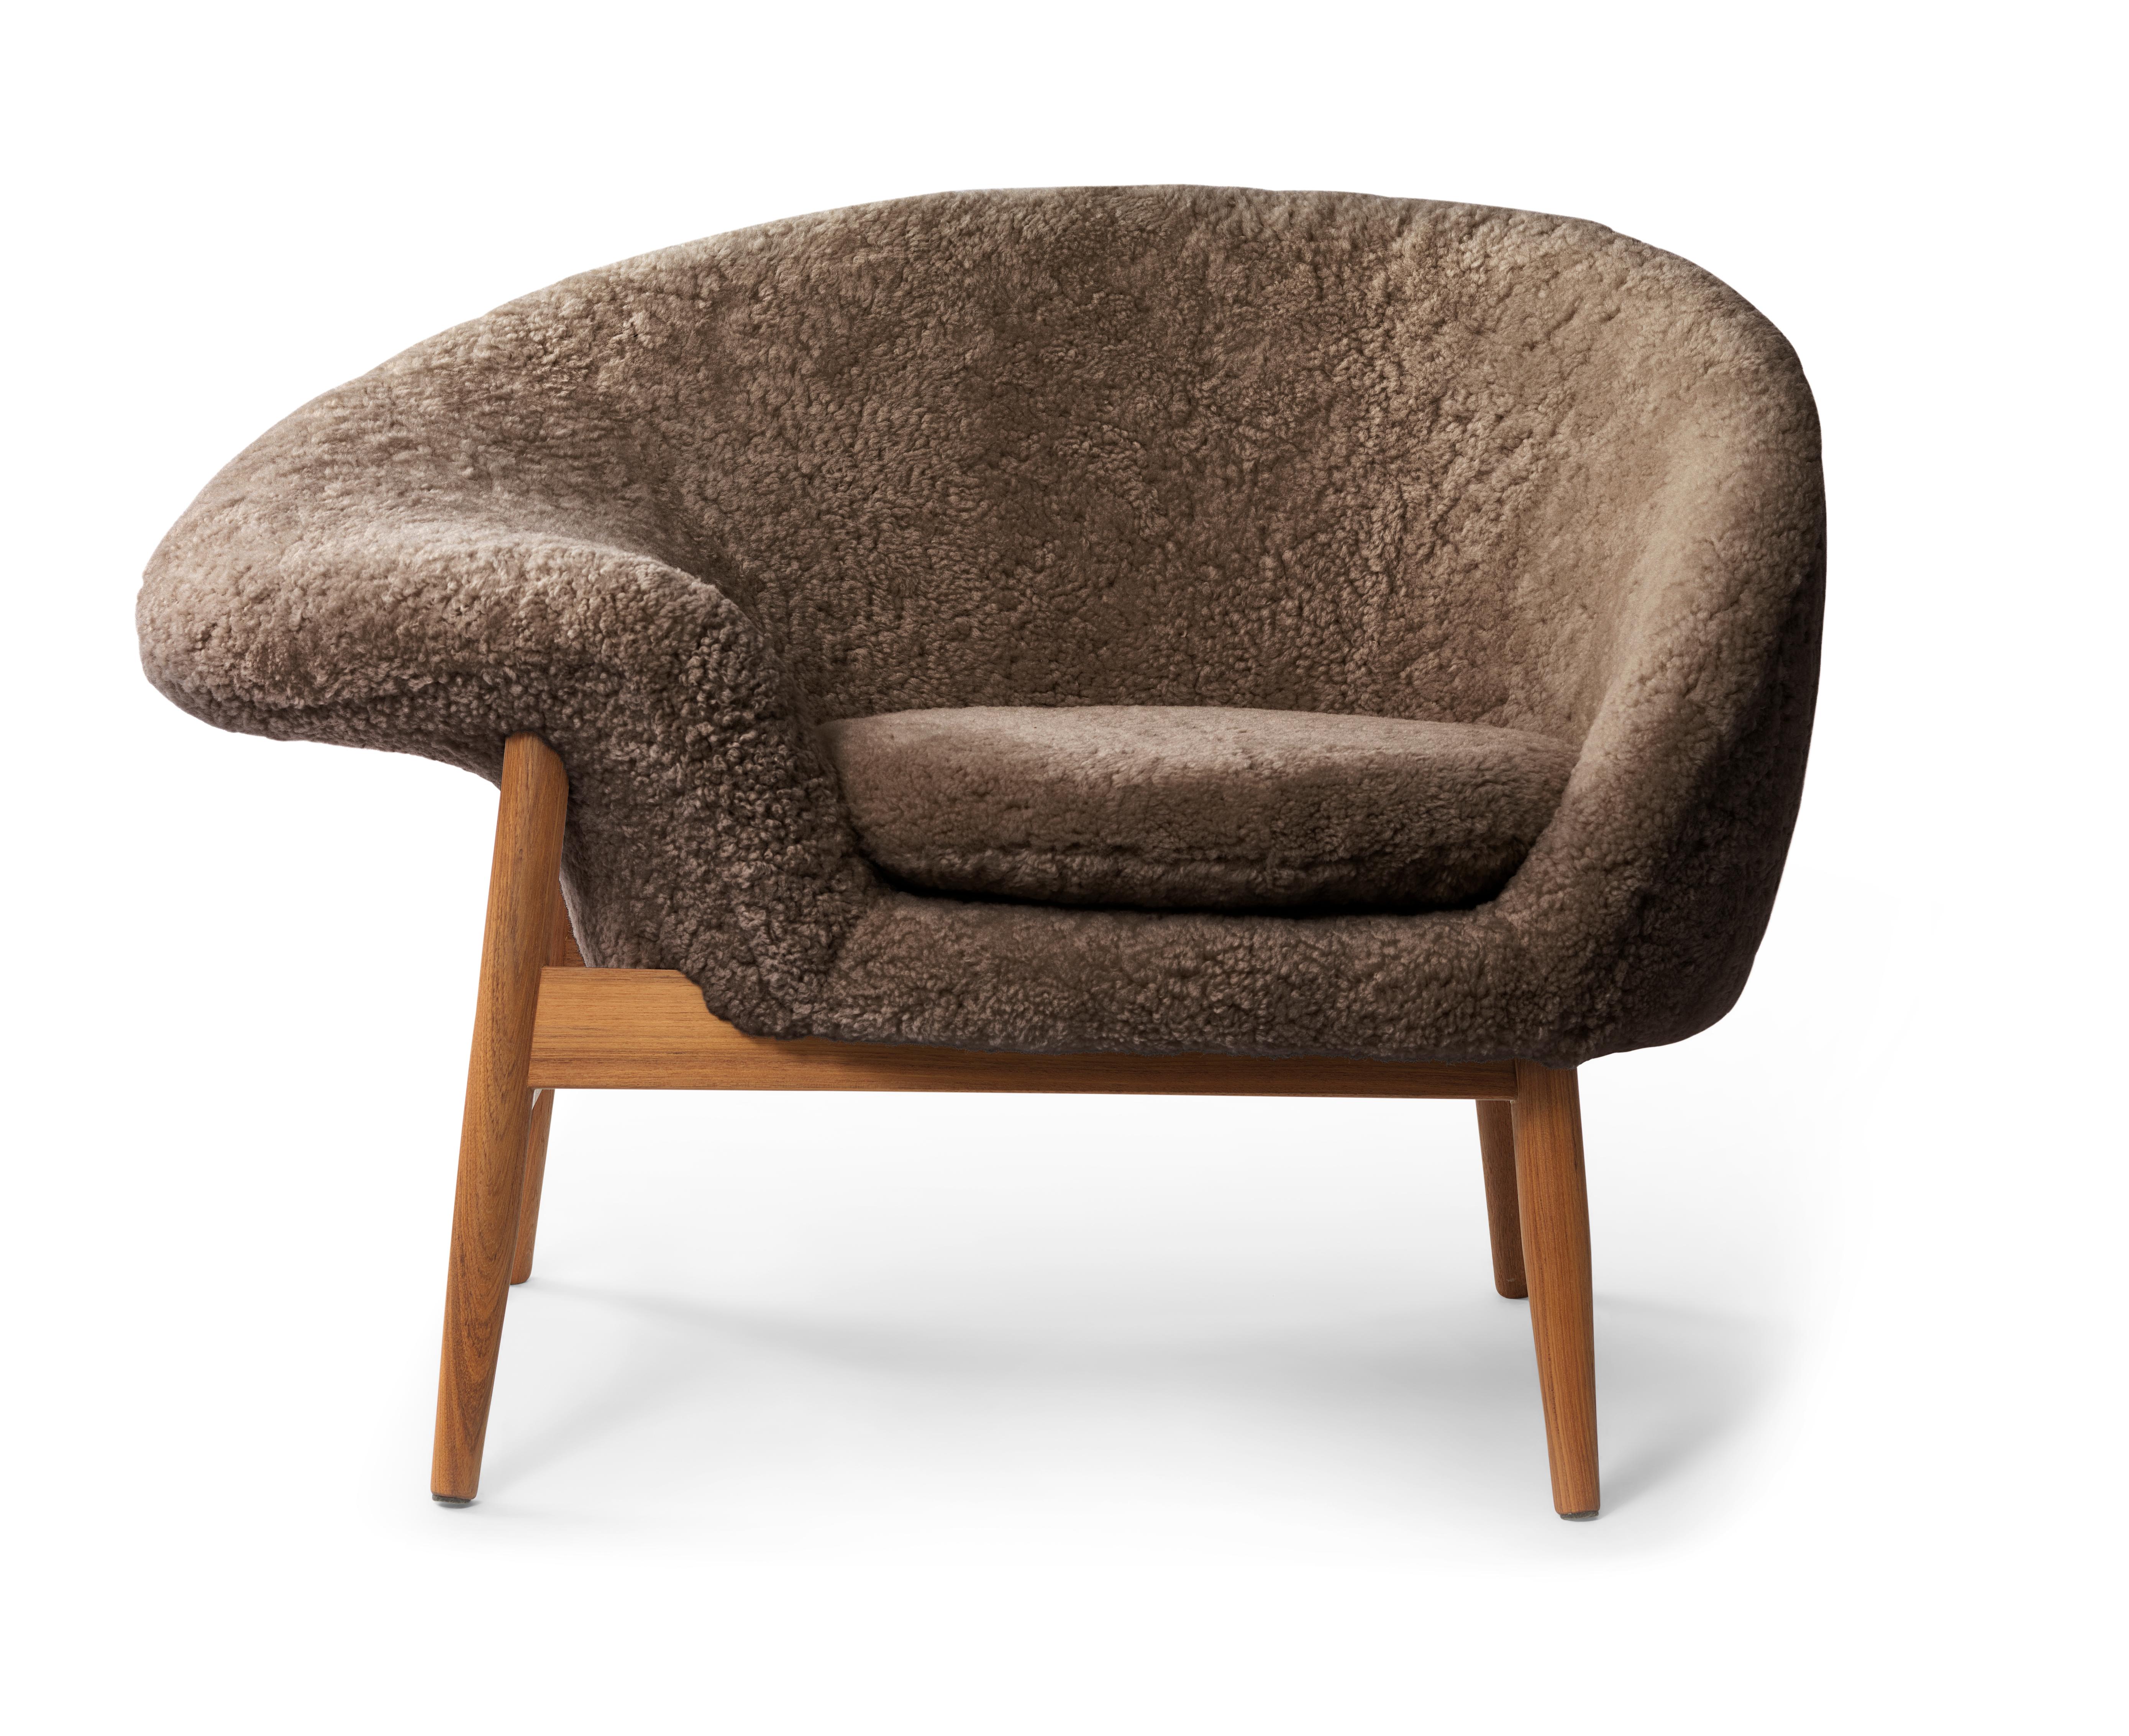 Fried egg left lounge chair sheepskin drake by Warm Nordic
Dimensions: D99 x W68 x H 68 cm
Material: sheepskin, textile or nubuck upholstery, solid oiled teak
Weight: 25 kg
Also available in different colours and finishes. 

A unique